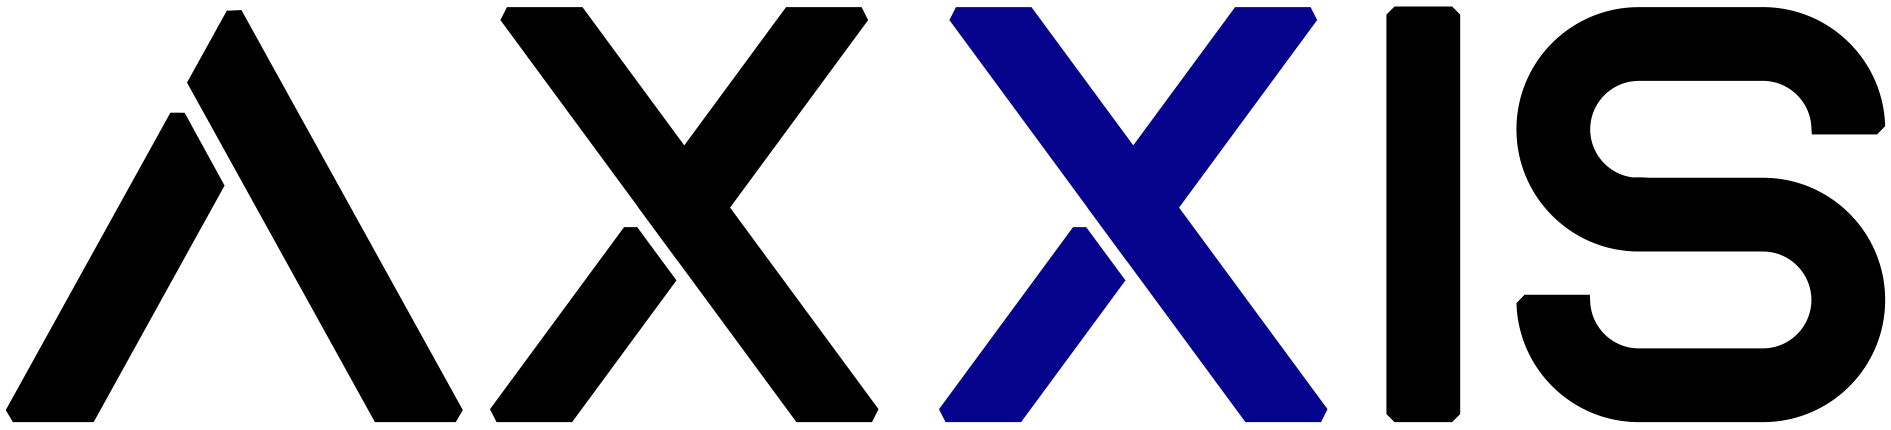 Axxis logo